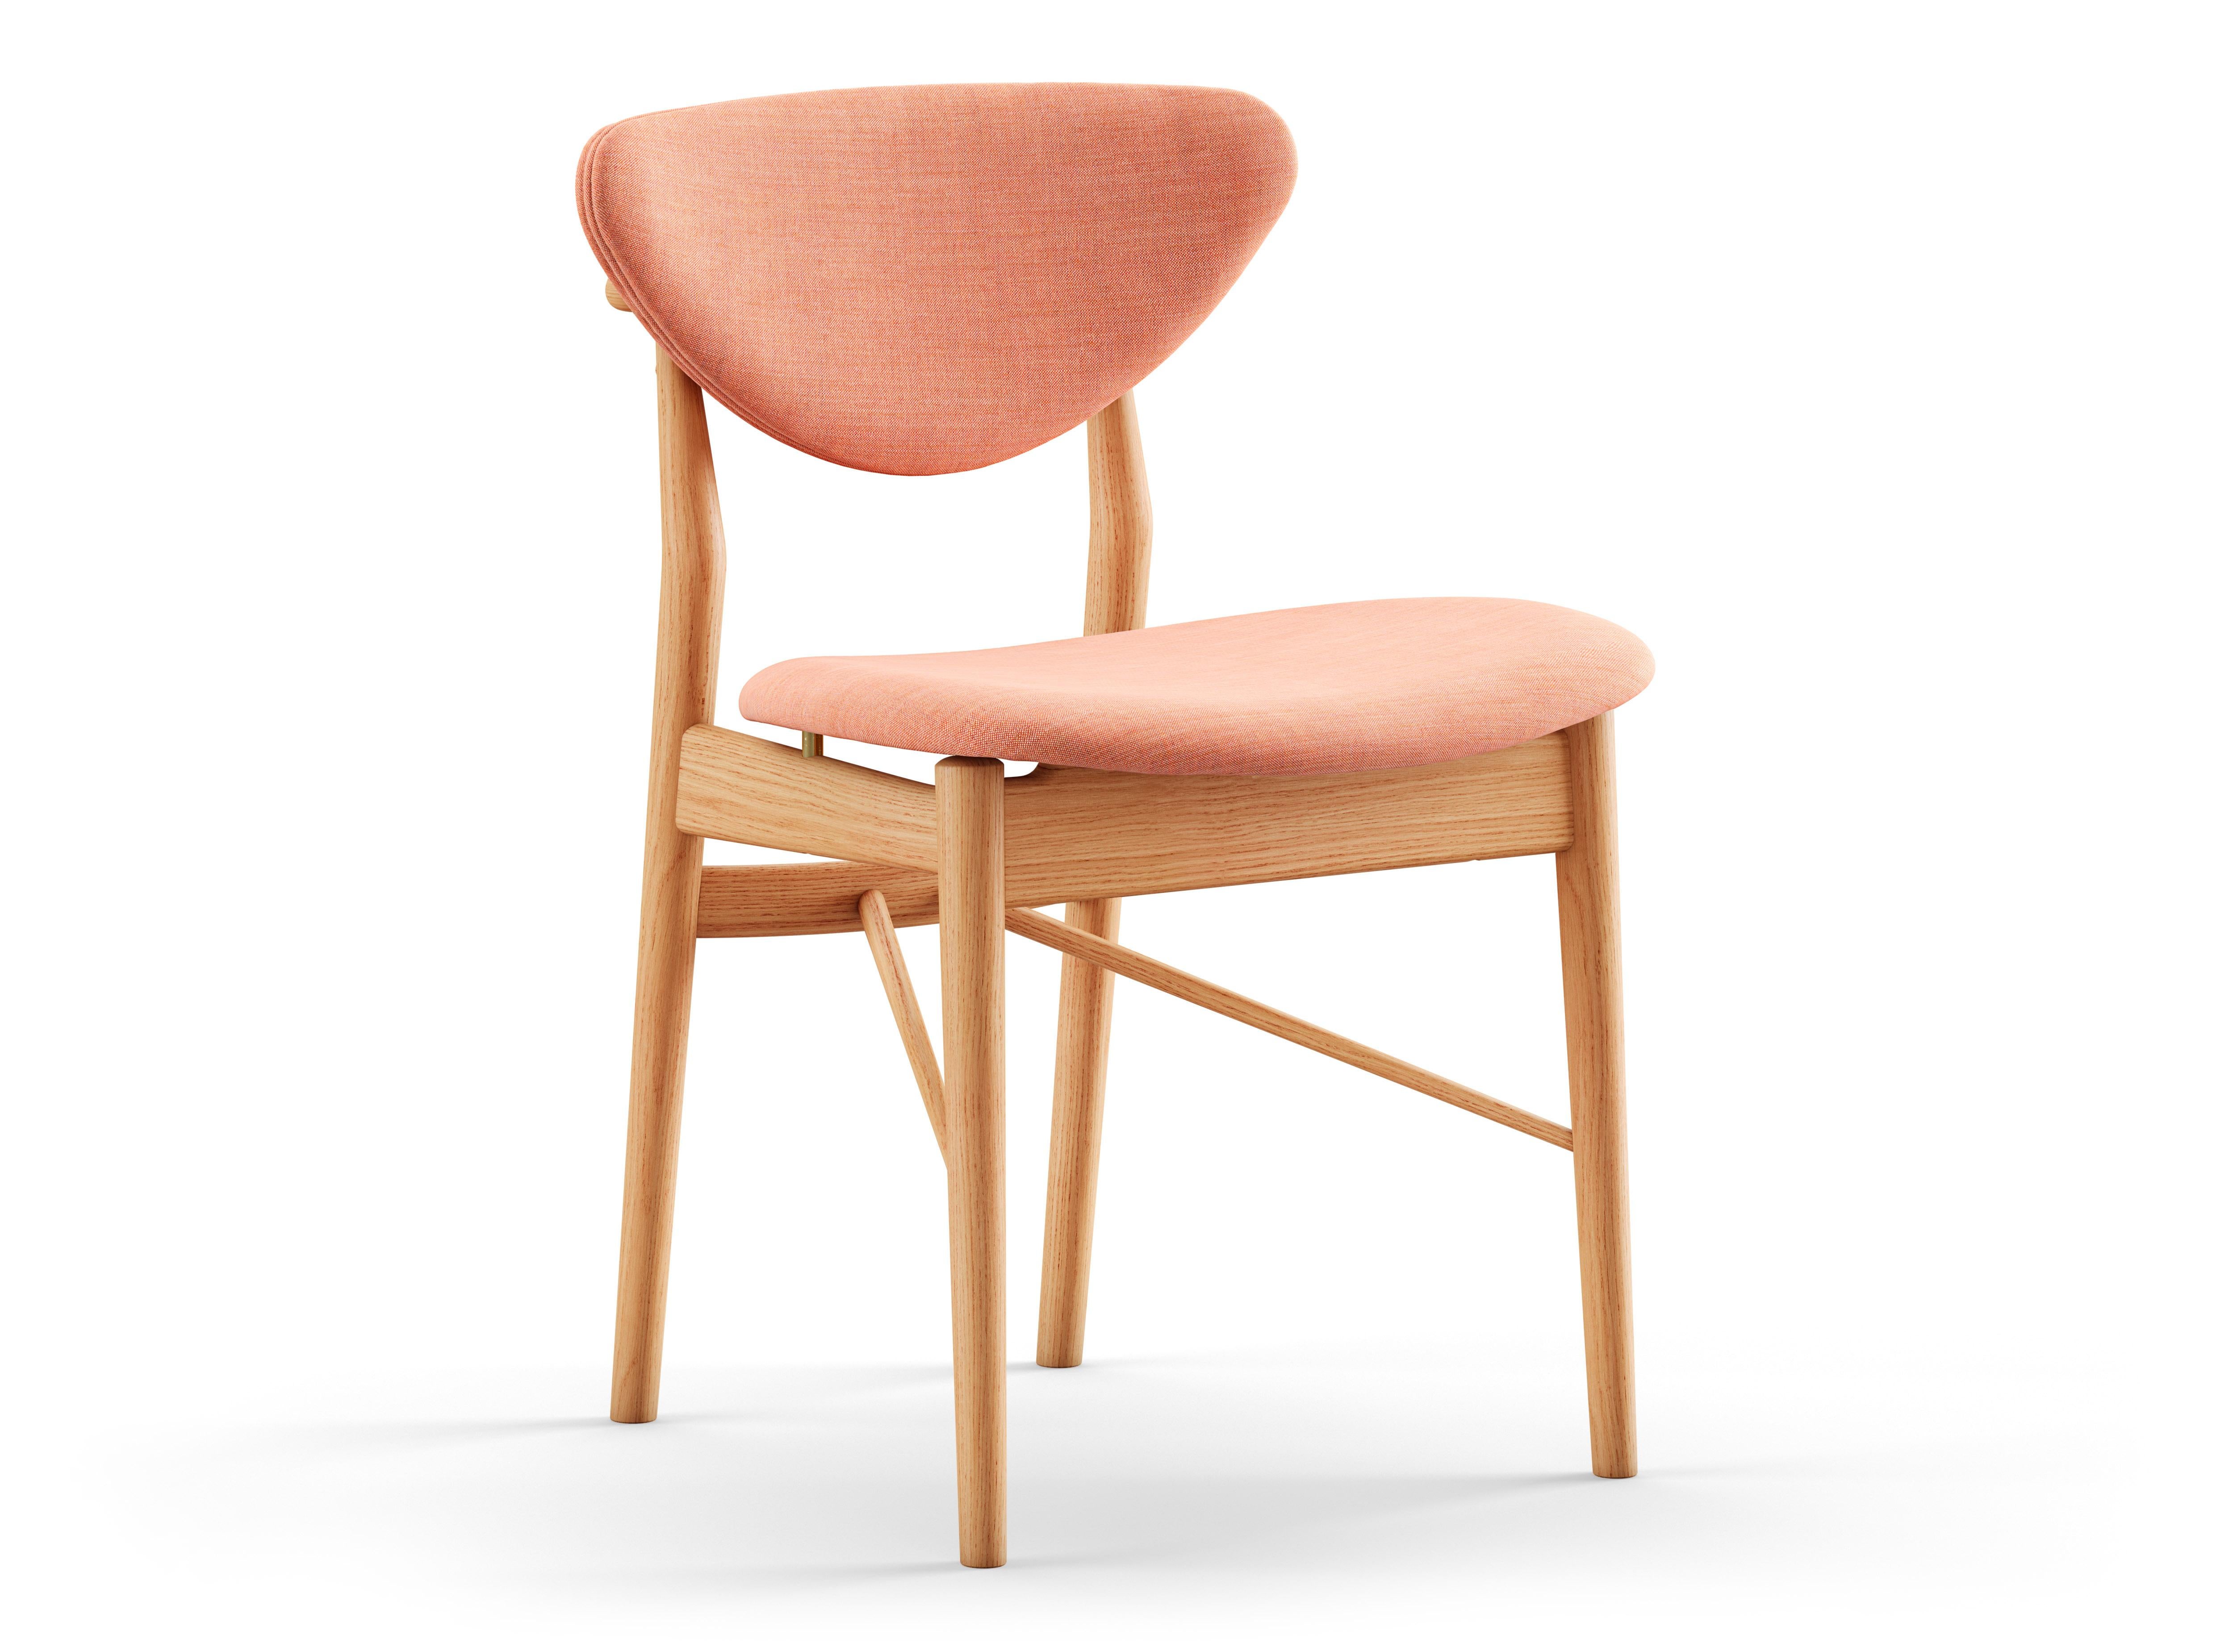 108 Chairs designed by Finn Juhl in 1946, relaunched in 208.
Manufactured by House of Finn Juhl in Denmark.
To this day, Finn Juhl's designs are unconventional and defy expectations with subtle details. Finn Juhl himself once said that the